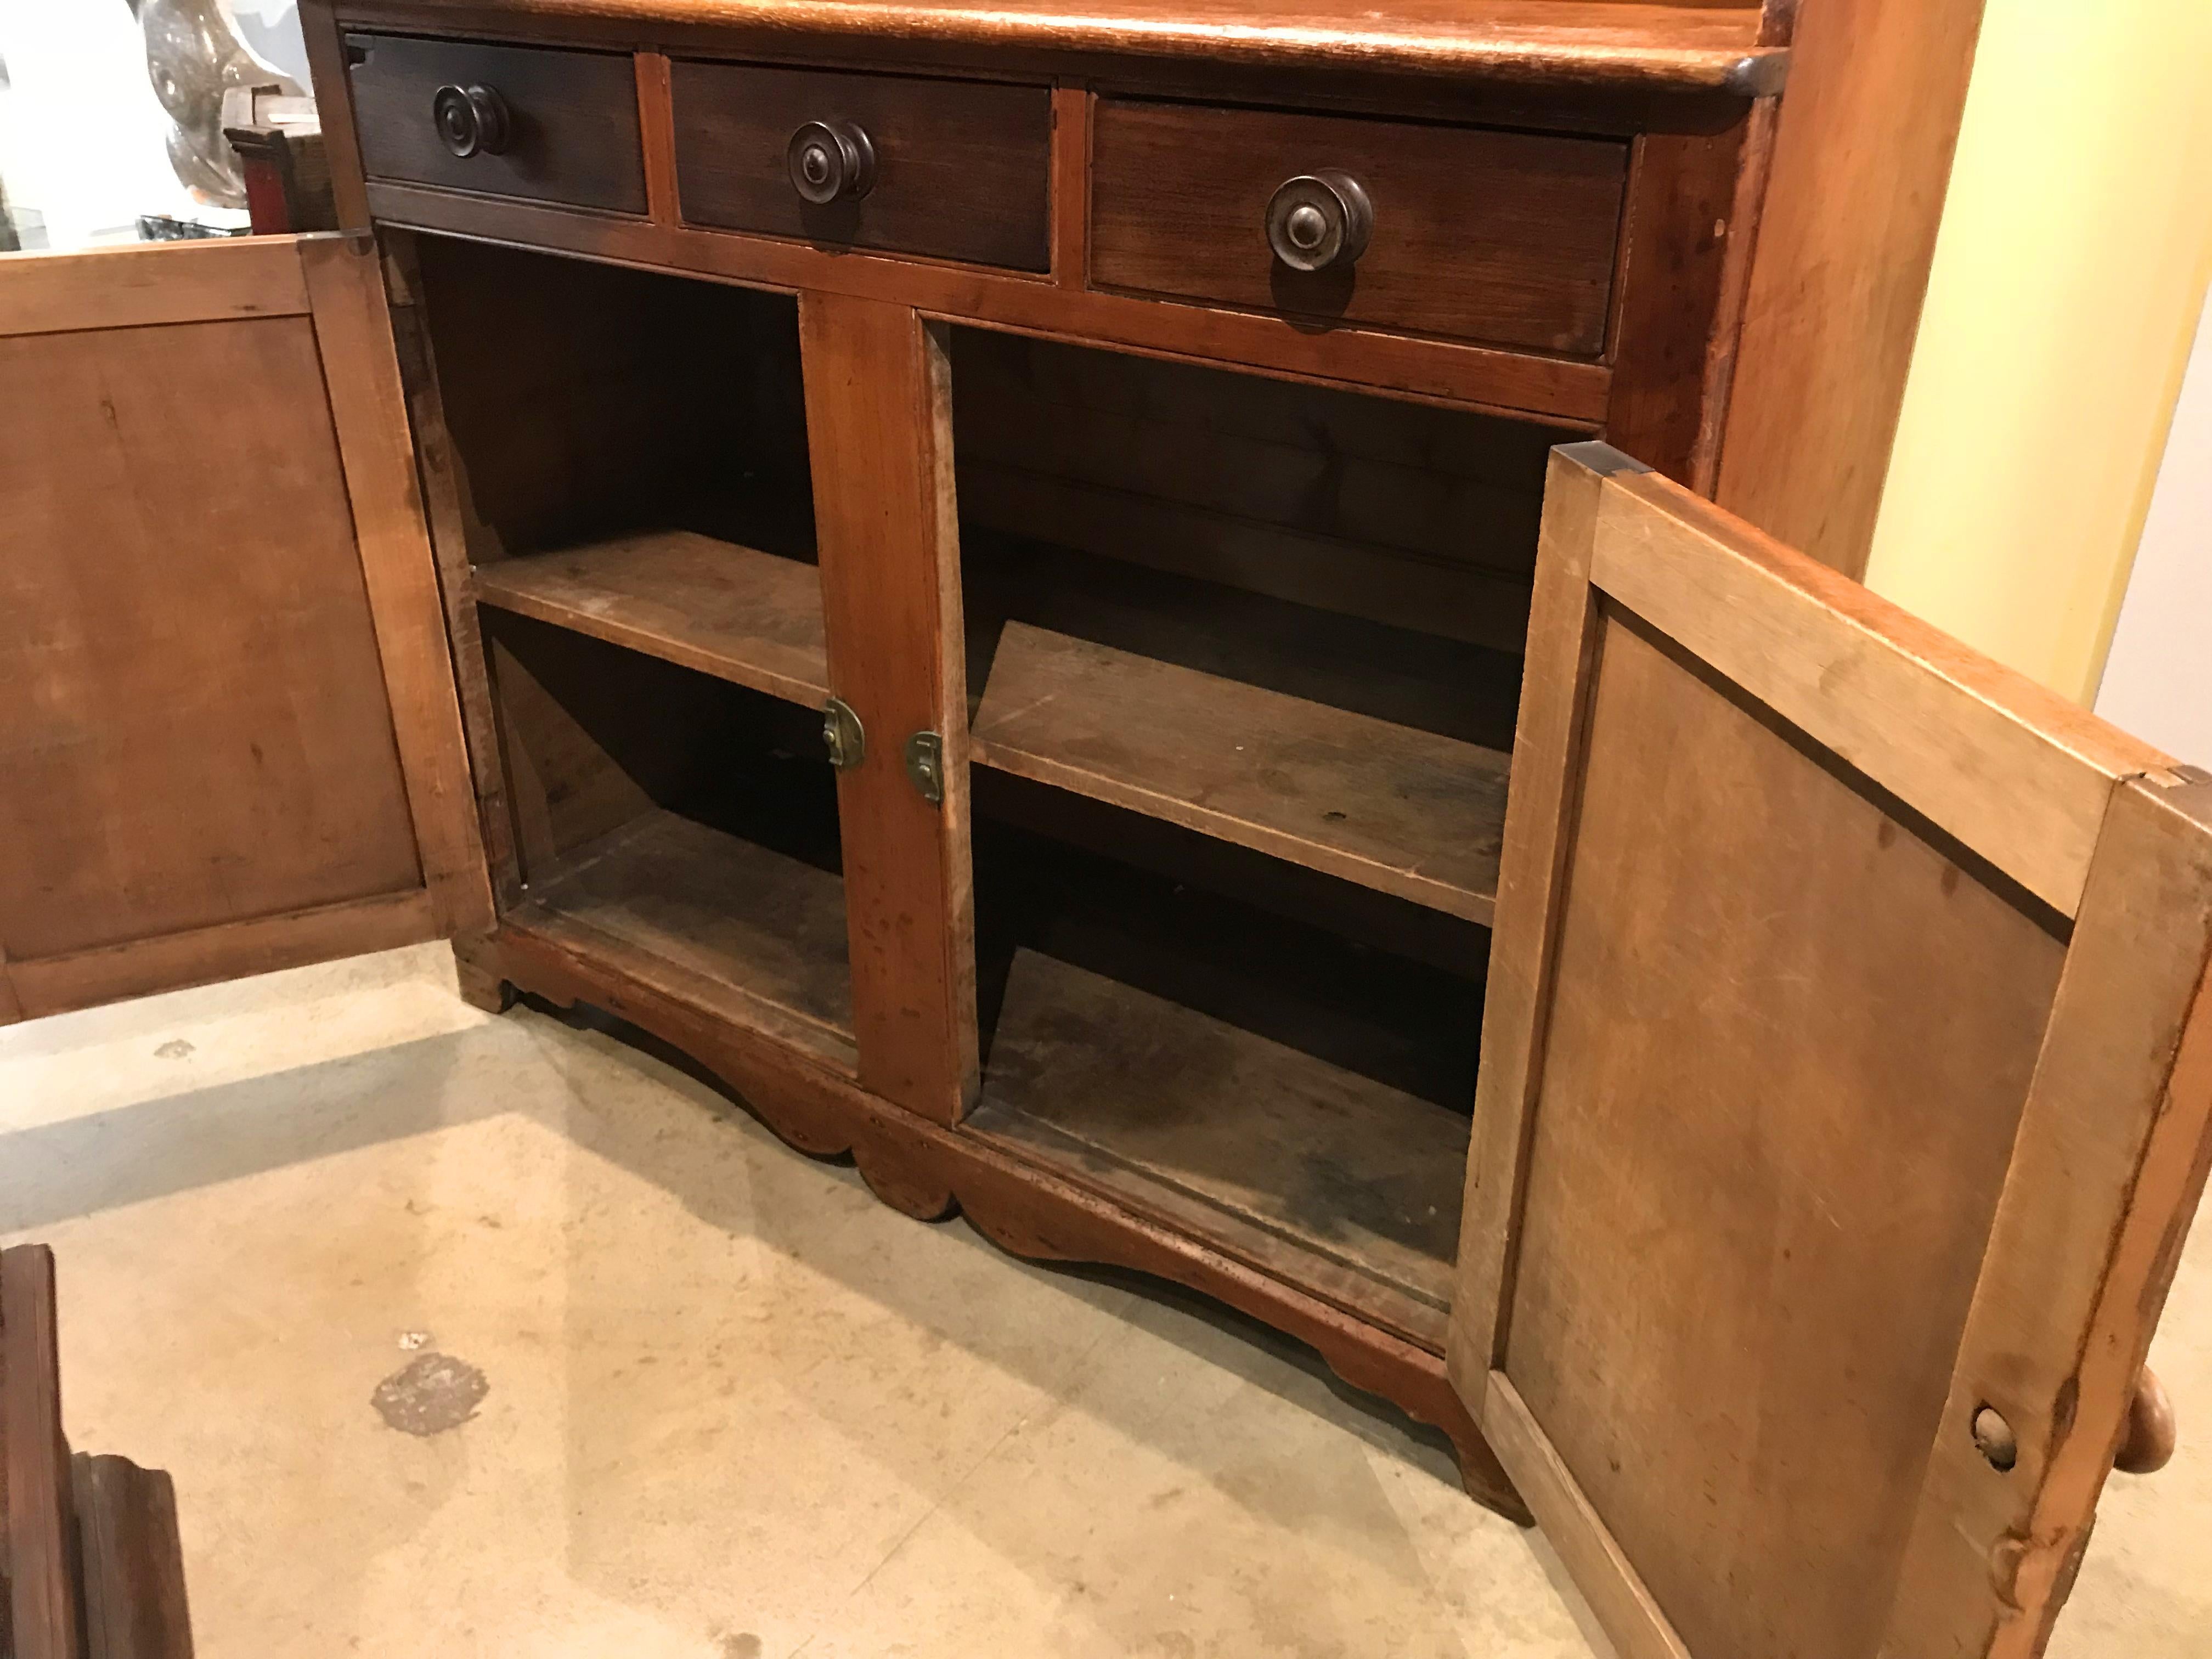 Chestnut 19th Century Country Step Back Server / Hutch or Cupboard, Possibly Canadian